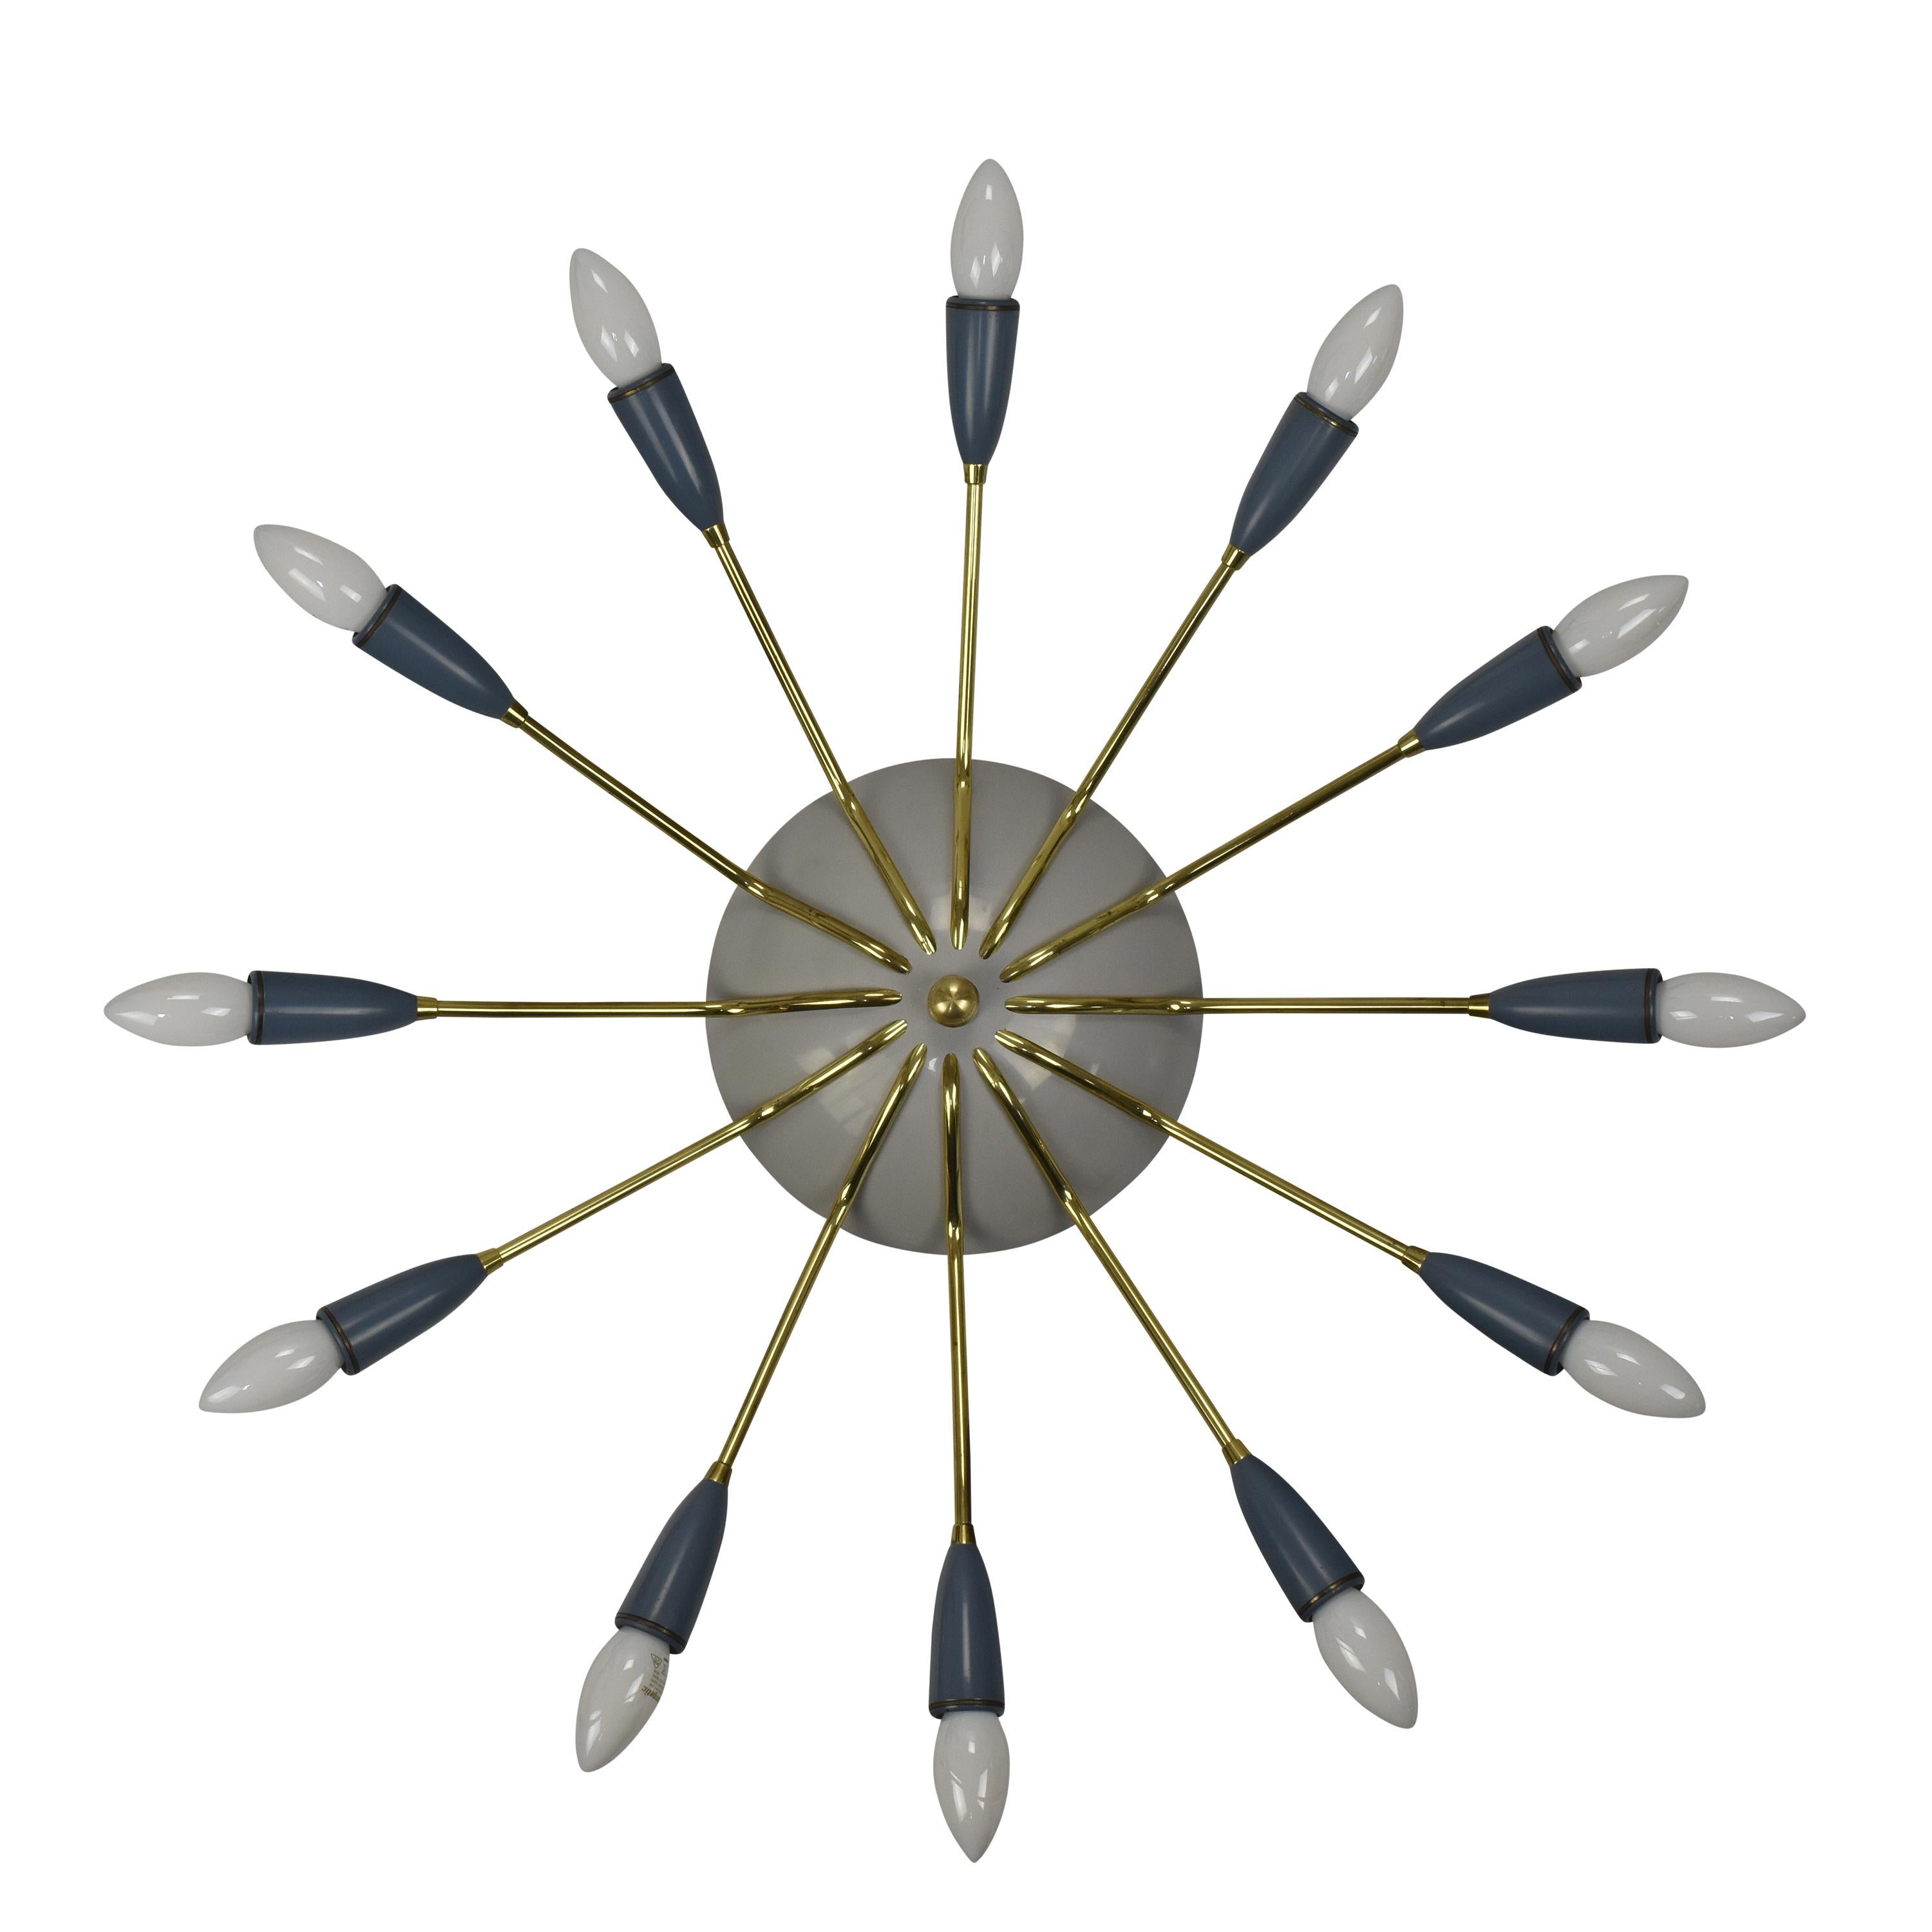 This large Sputnik chandelier, crafted in Italy during the 1950s, is an eye-catching piece of lighting. 

It boasts twelve brass arms, each adorned with an E14 light bulb. The design of the fixture bears a resemblance to a spider or sunburst, with